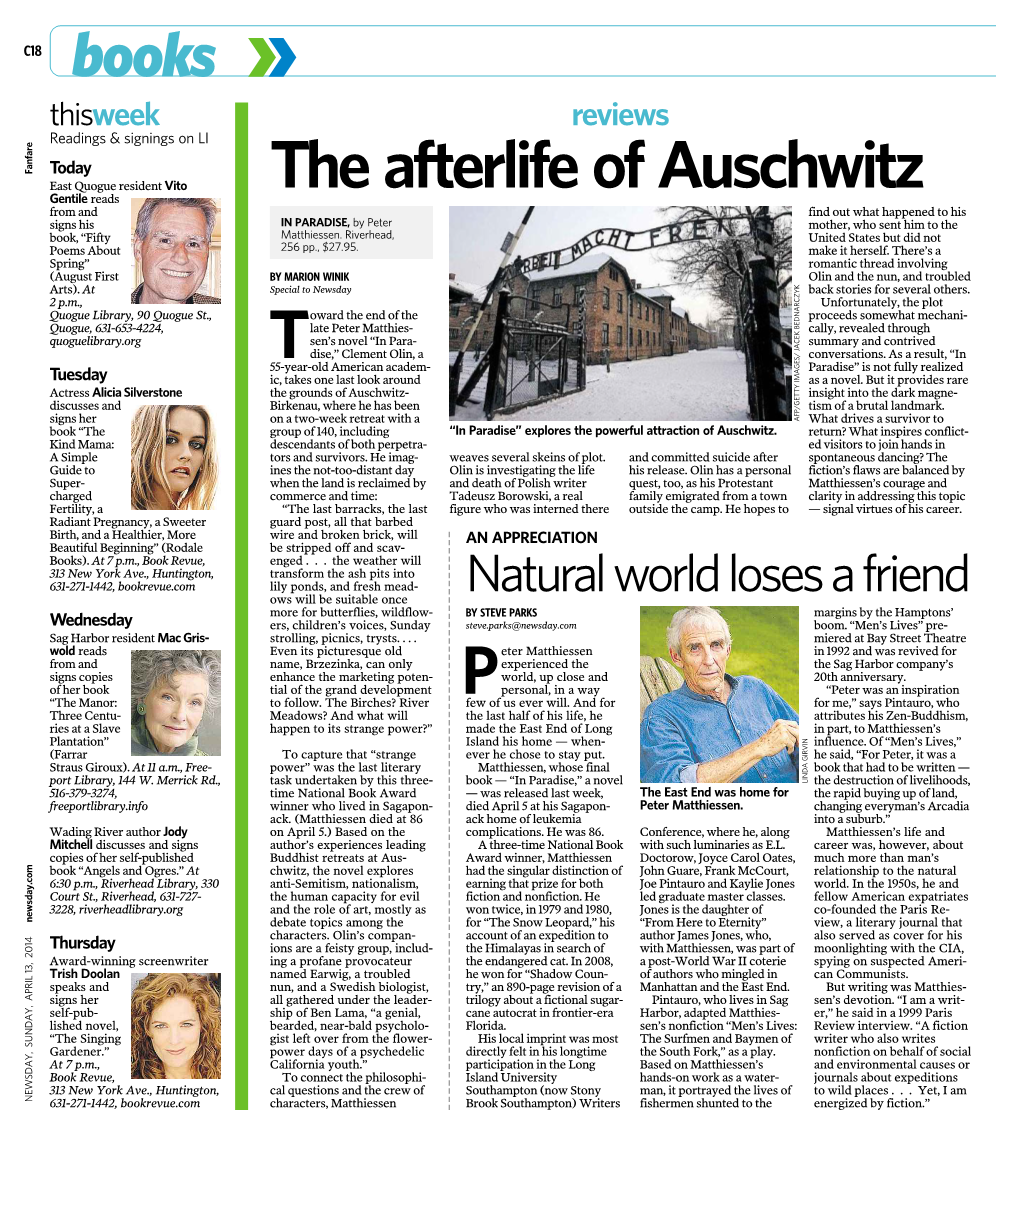 The Afterlife of Auschwitz